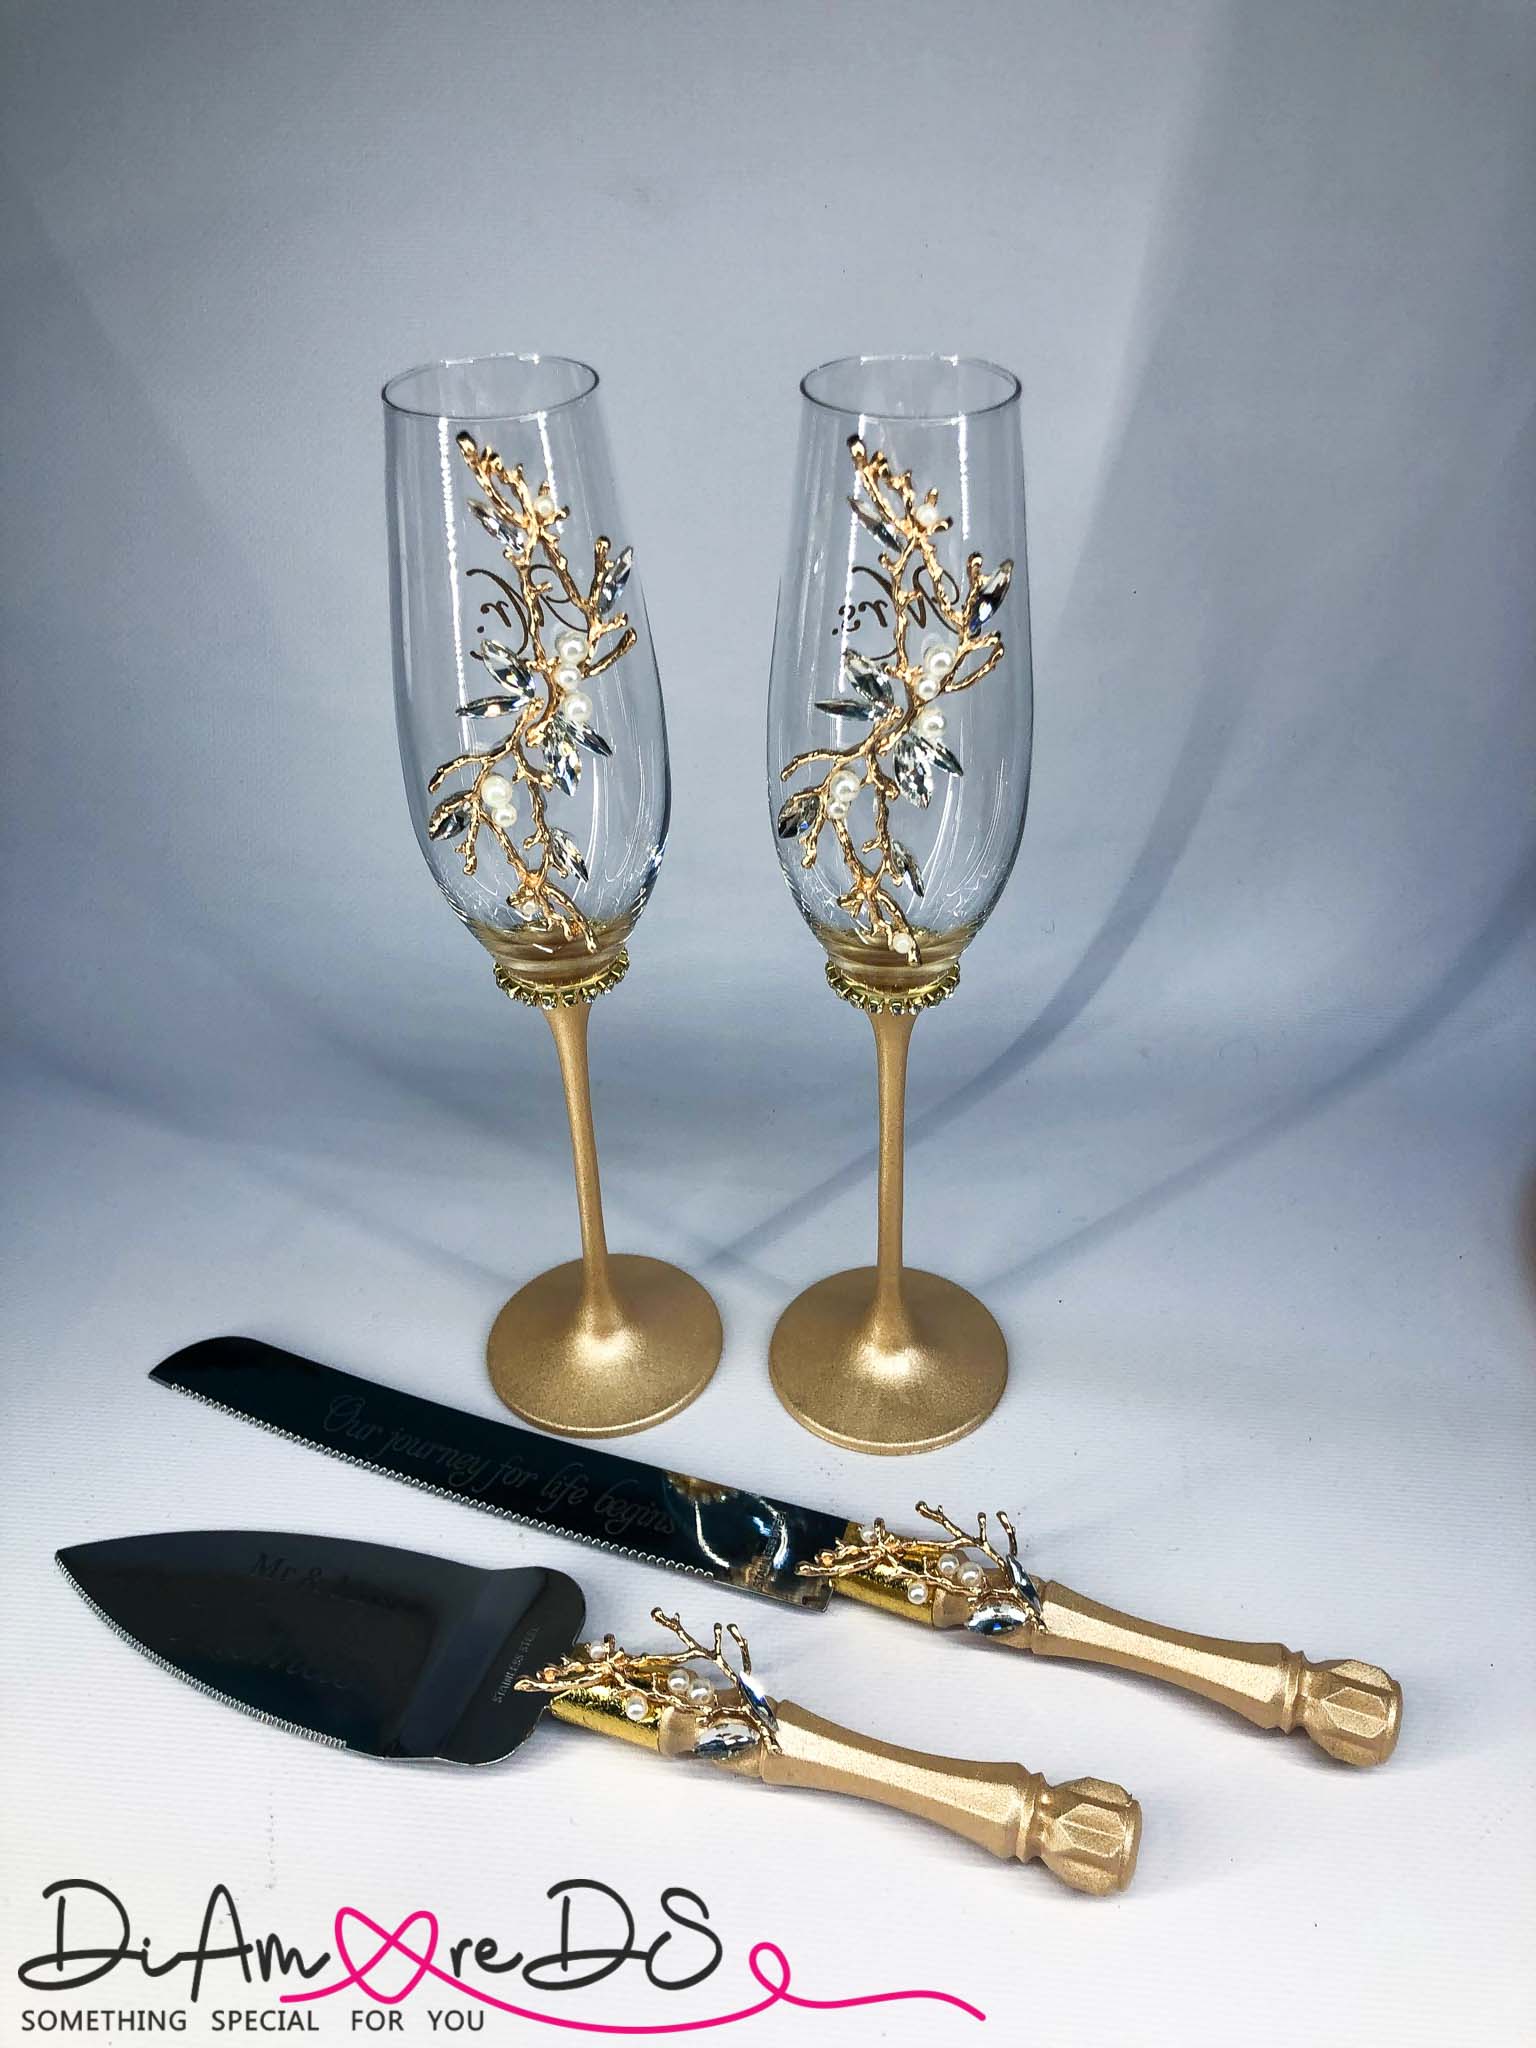 Personalized gold champagne flutes and server